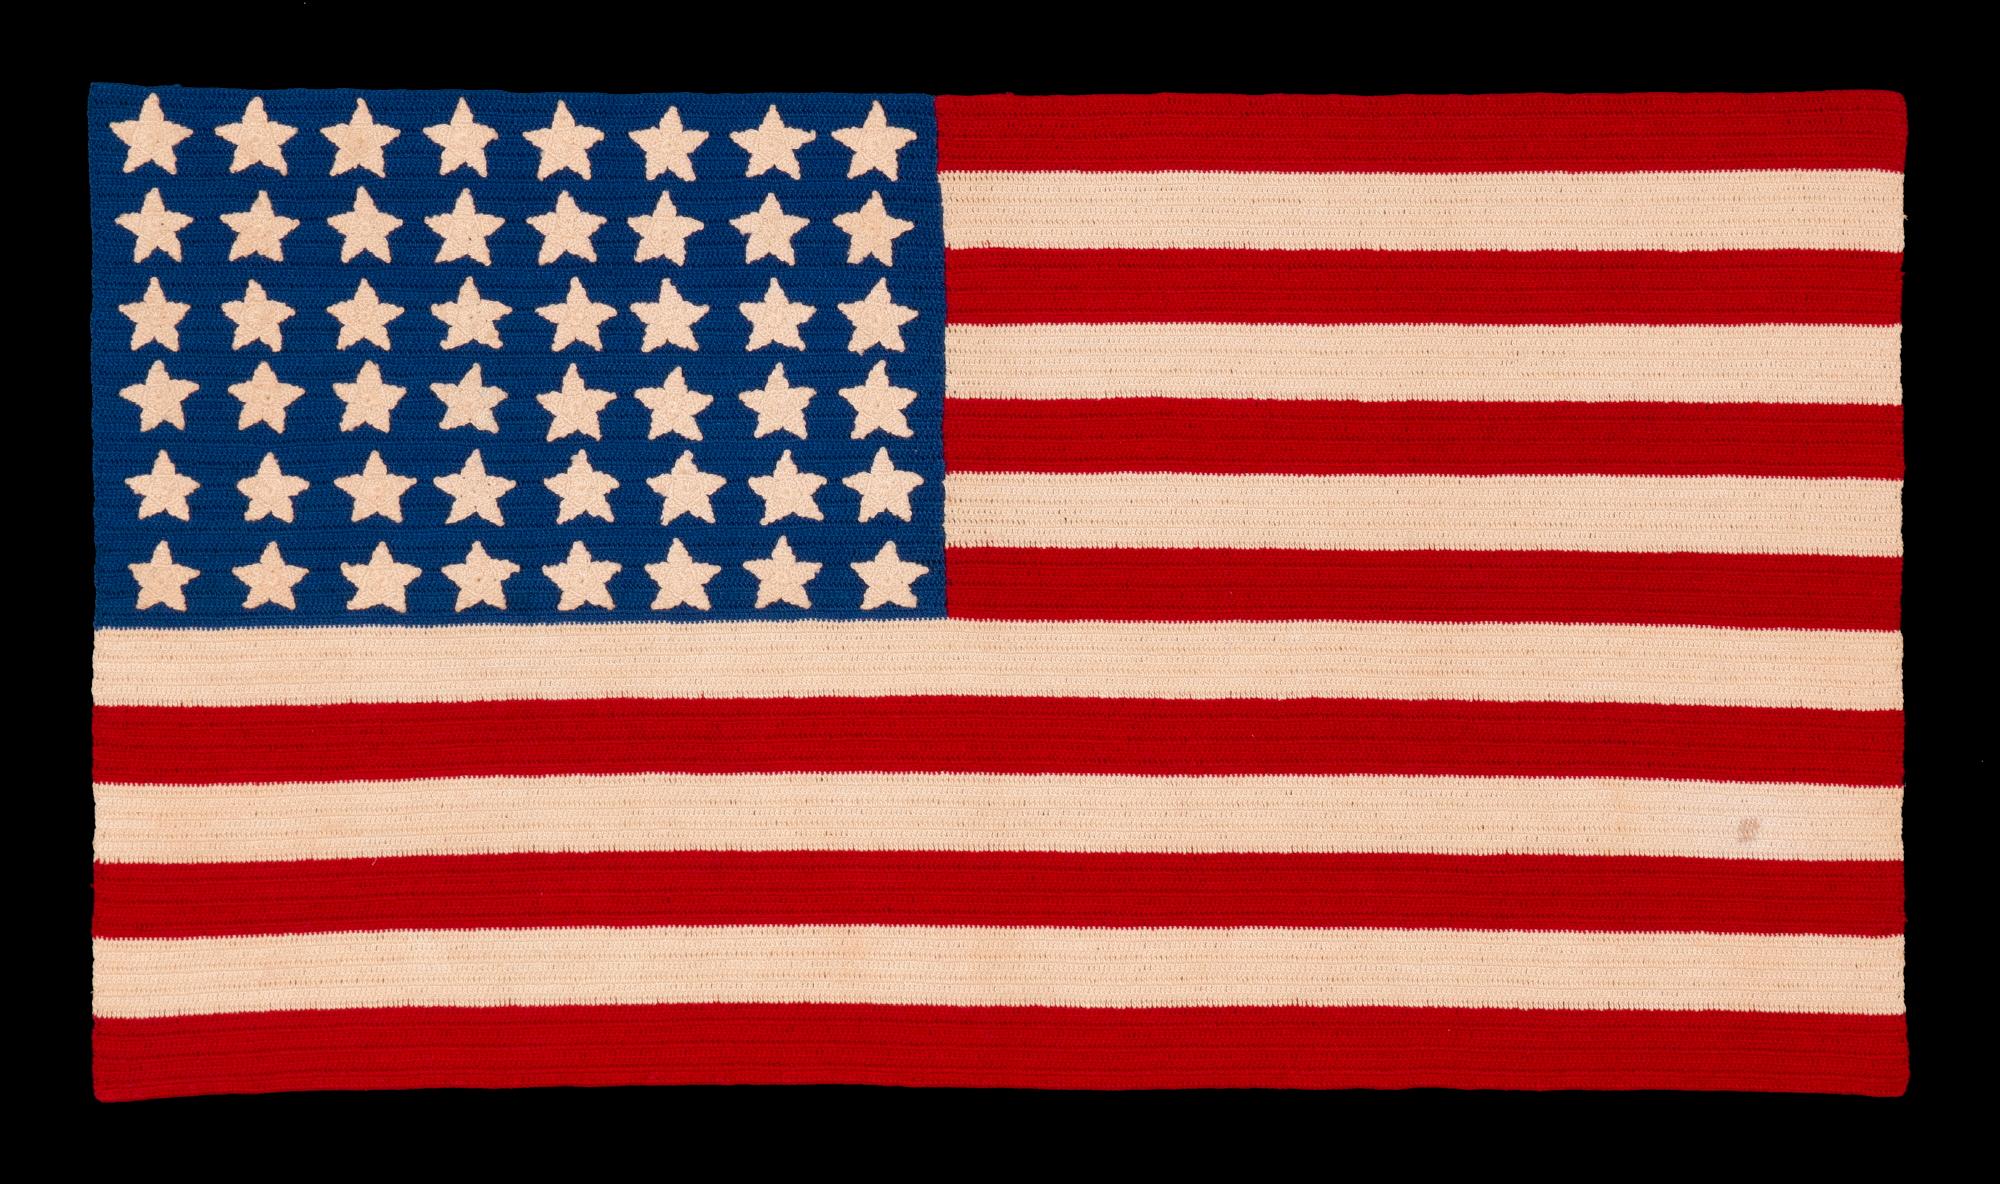 48 STARS ON A CROCHETED AMERICAN FLAG, PROBABLY MADE IN THE PATRIOTISM OF WWII (U.S. INVOLVEMENT 1941-1945), A BEAUTIFUL EXAMPLE, WITH LARGE, WELL-EXECUTED STARS AND STRIKING COLORS

Beginning around the turn of the century, it became popular to